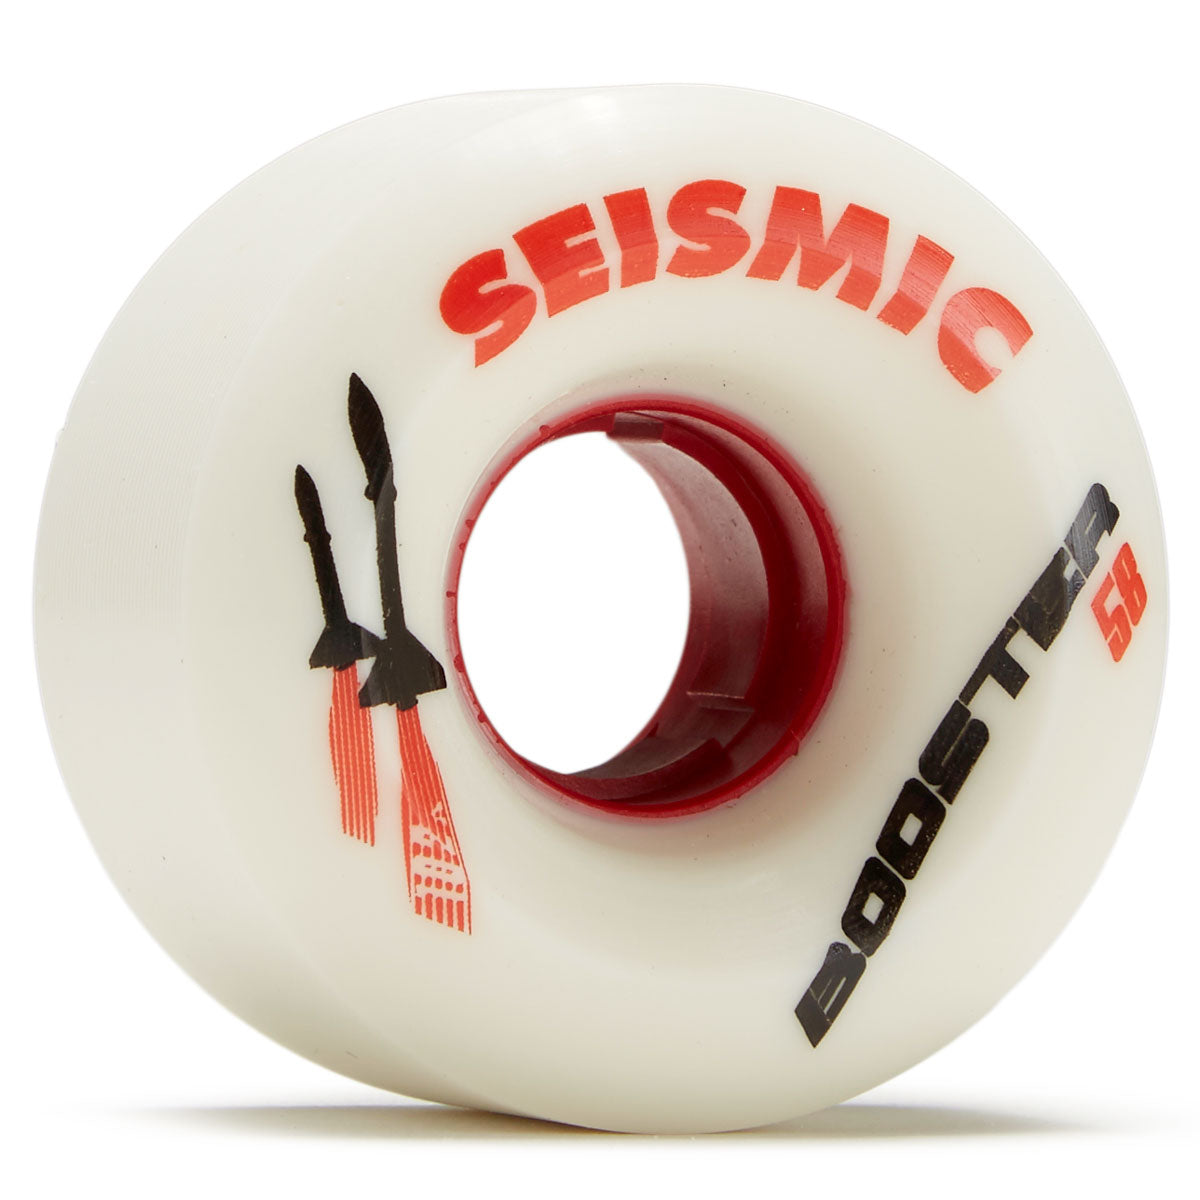 Seismic Booster 102a Longboard Wheels - White/Red - 58mm image 1